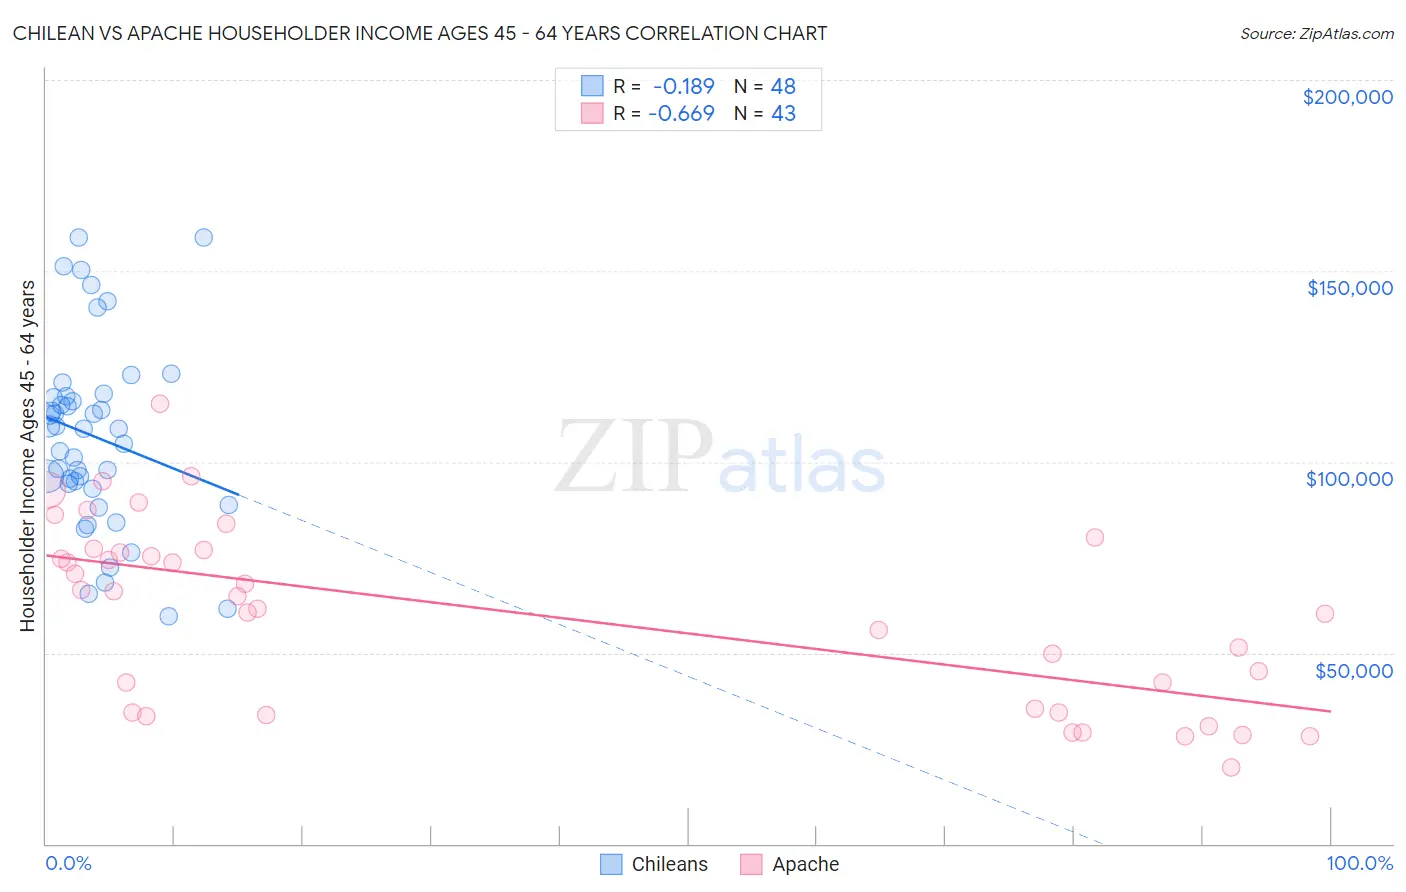 Chilean vs Apache Householder Income Ages 45 - 64 years